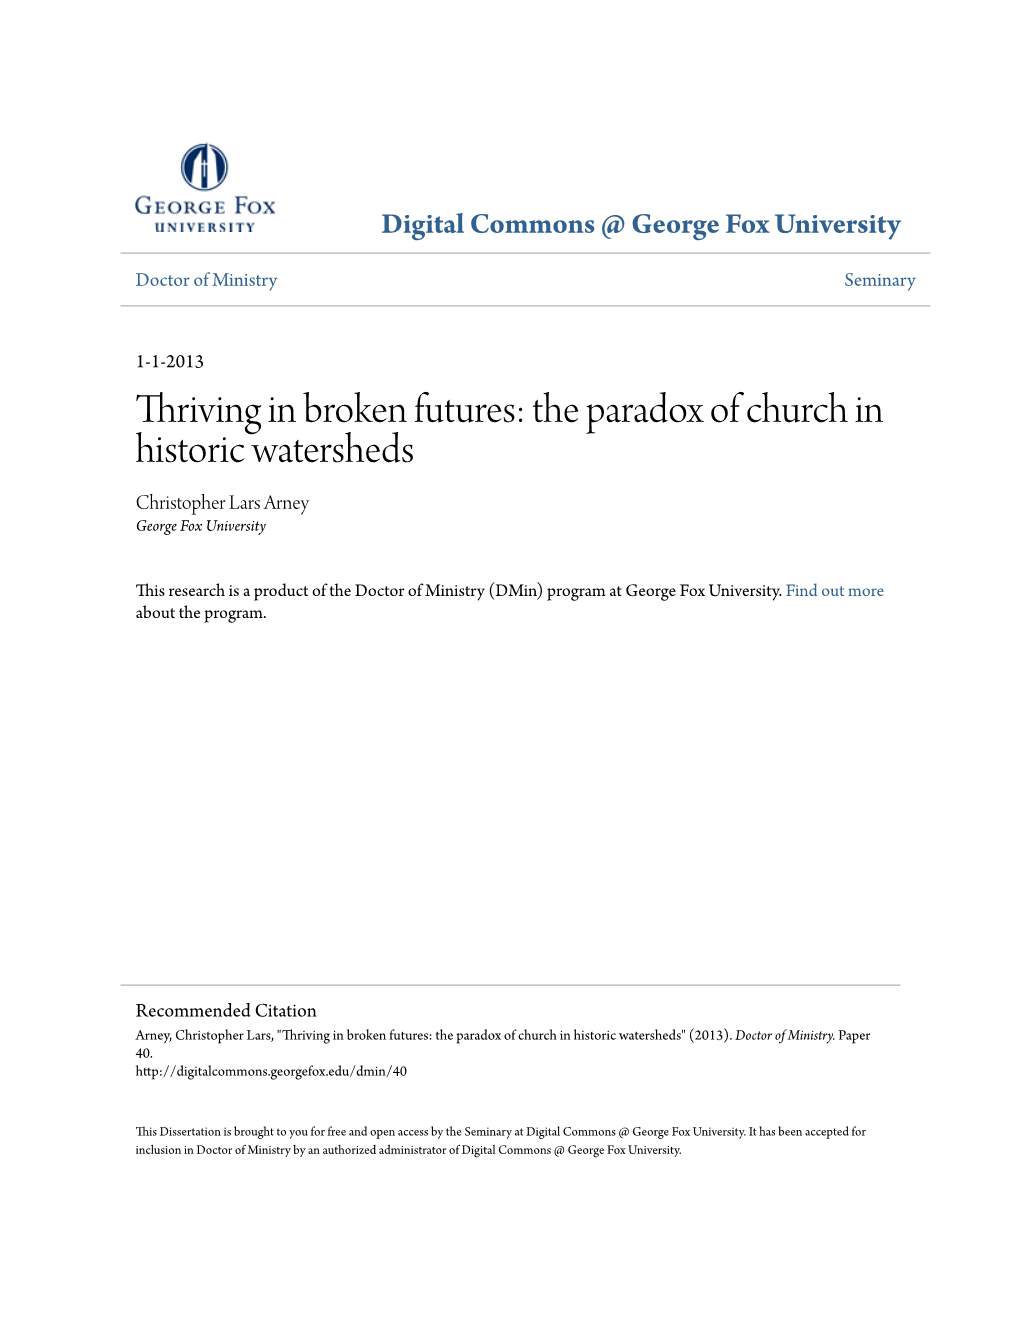 Thriving in Broken Futures: the Paradox of Church in Historic Watersheds Christopher Lars Arney George Fox University